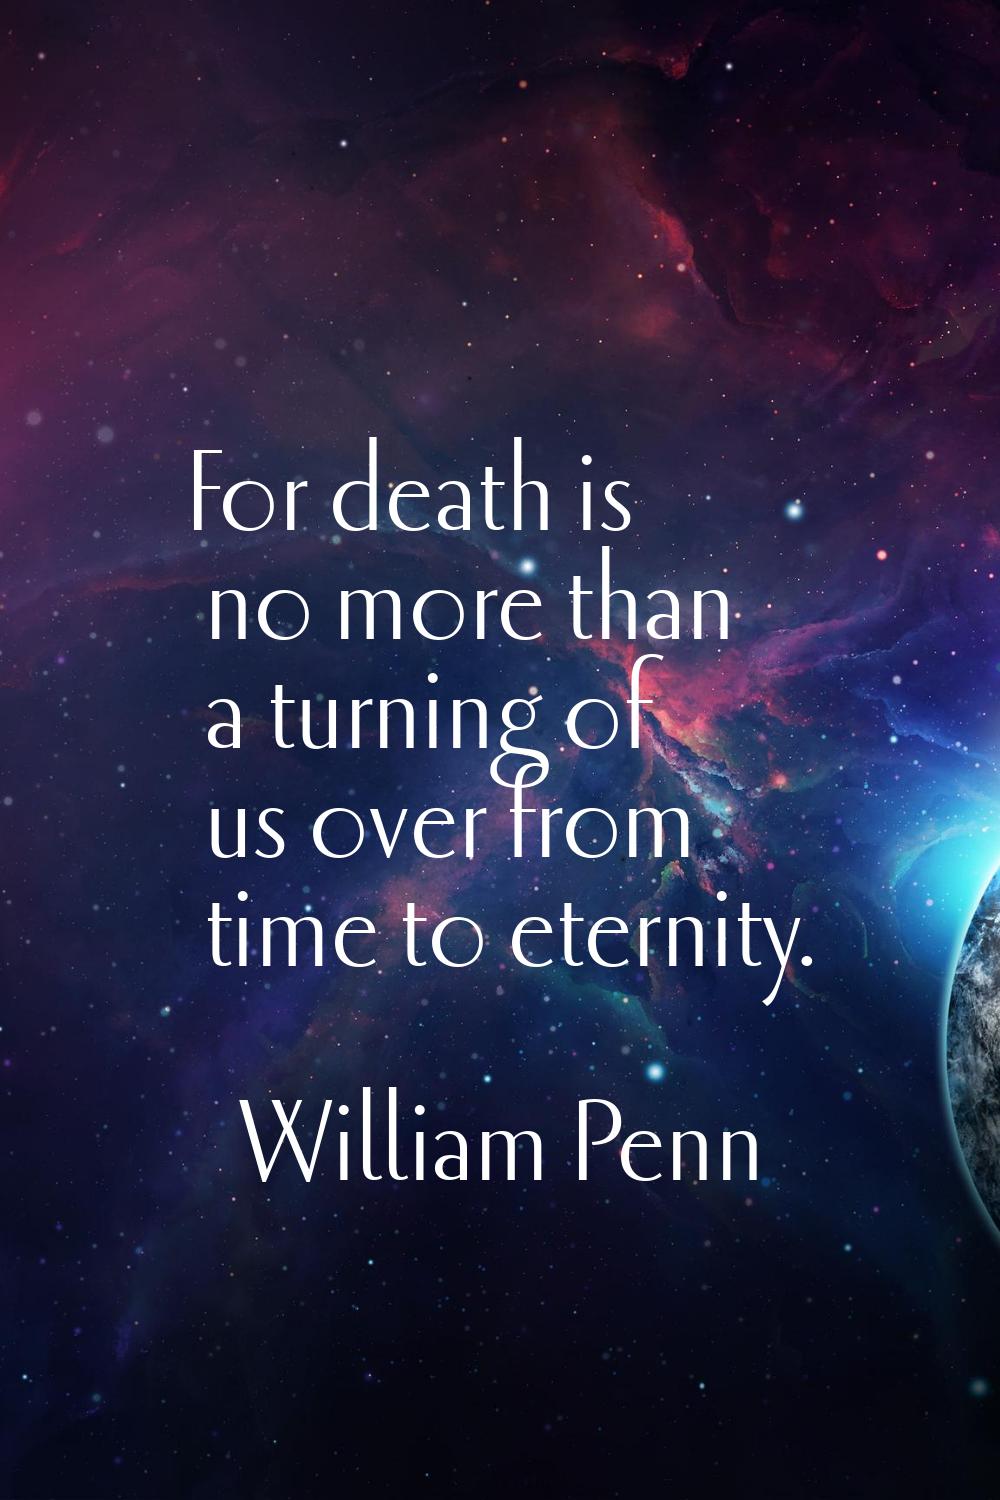 For death is no more than a turning of us over from time to eternity.